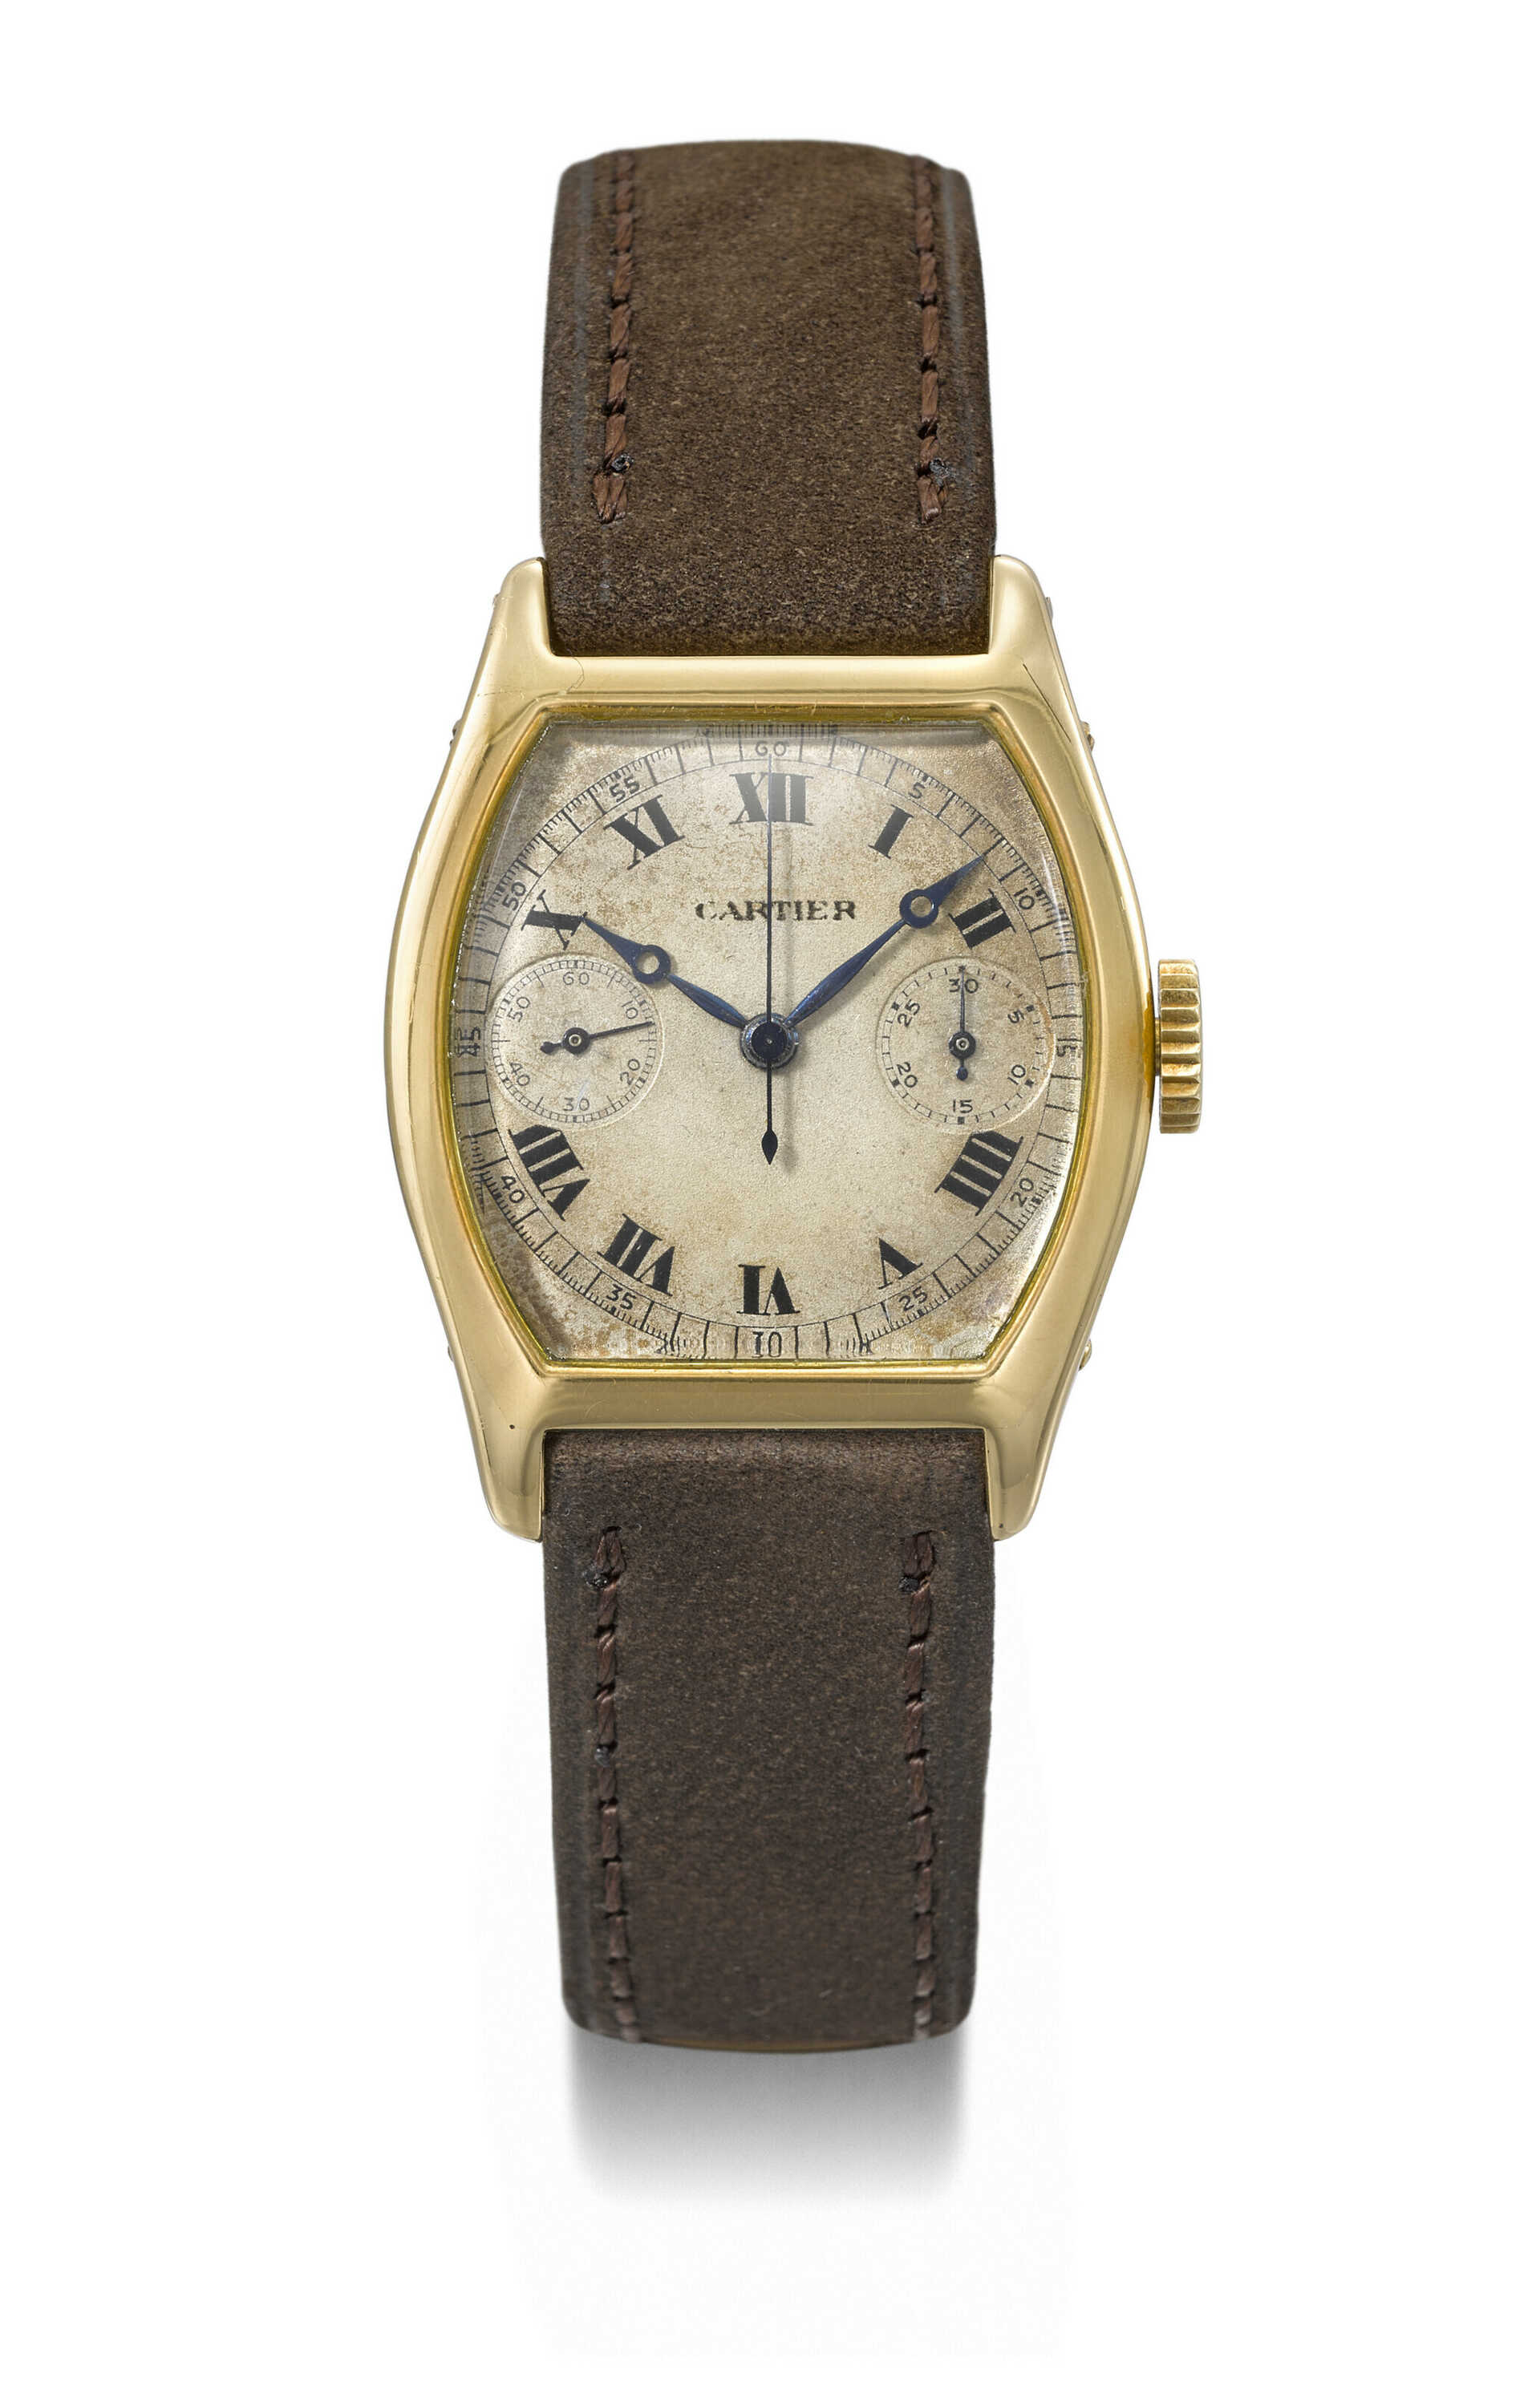 CARTIER. AN EXCEEDINGLY RARE AND WELL PRESERVED 18K GOLD TONNEAU-SHAPED SINGLE BUTTON CHRONOGRAPH WRISTWATCH WITH 30-MINUTE REGISTER